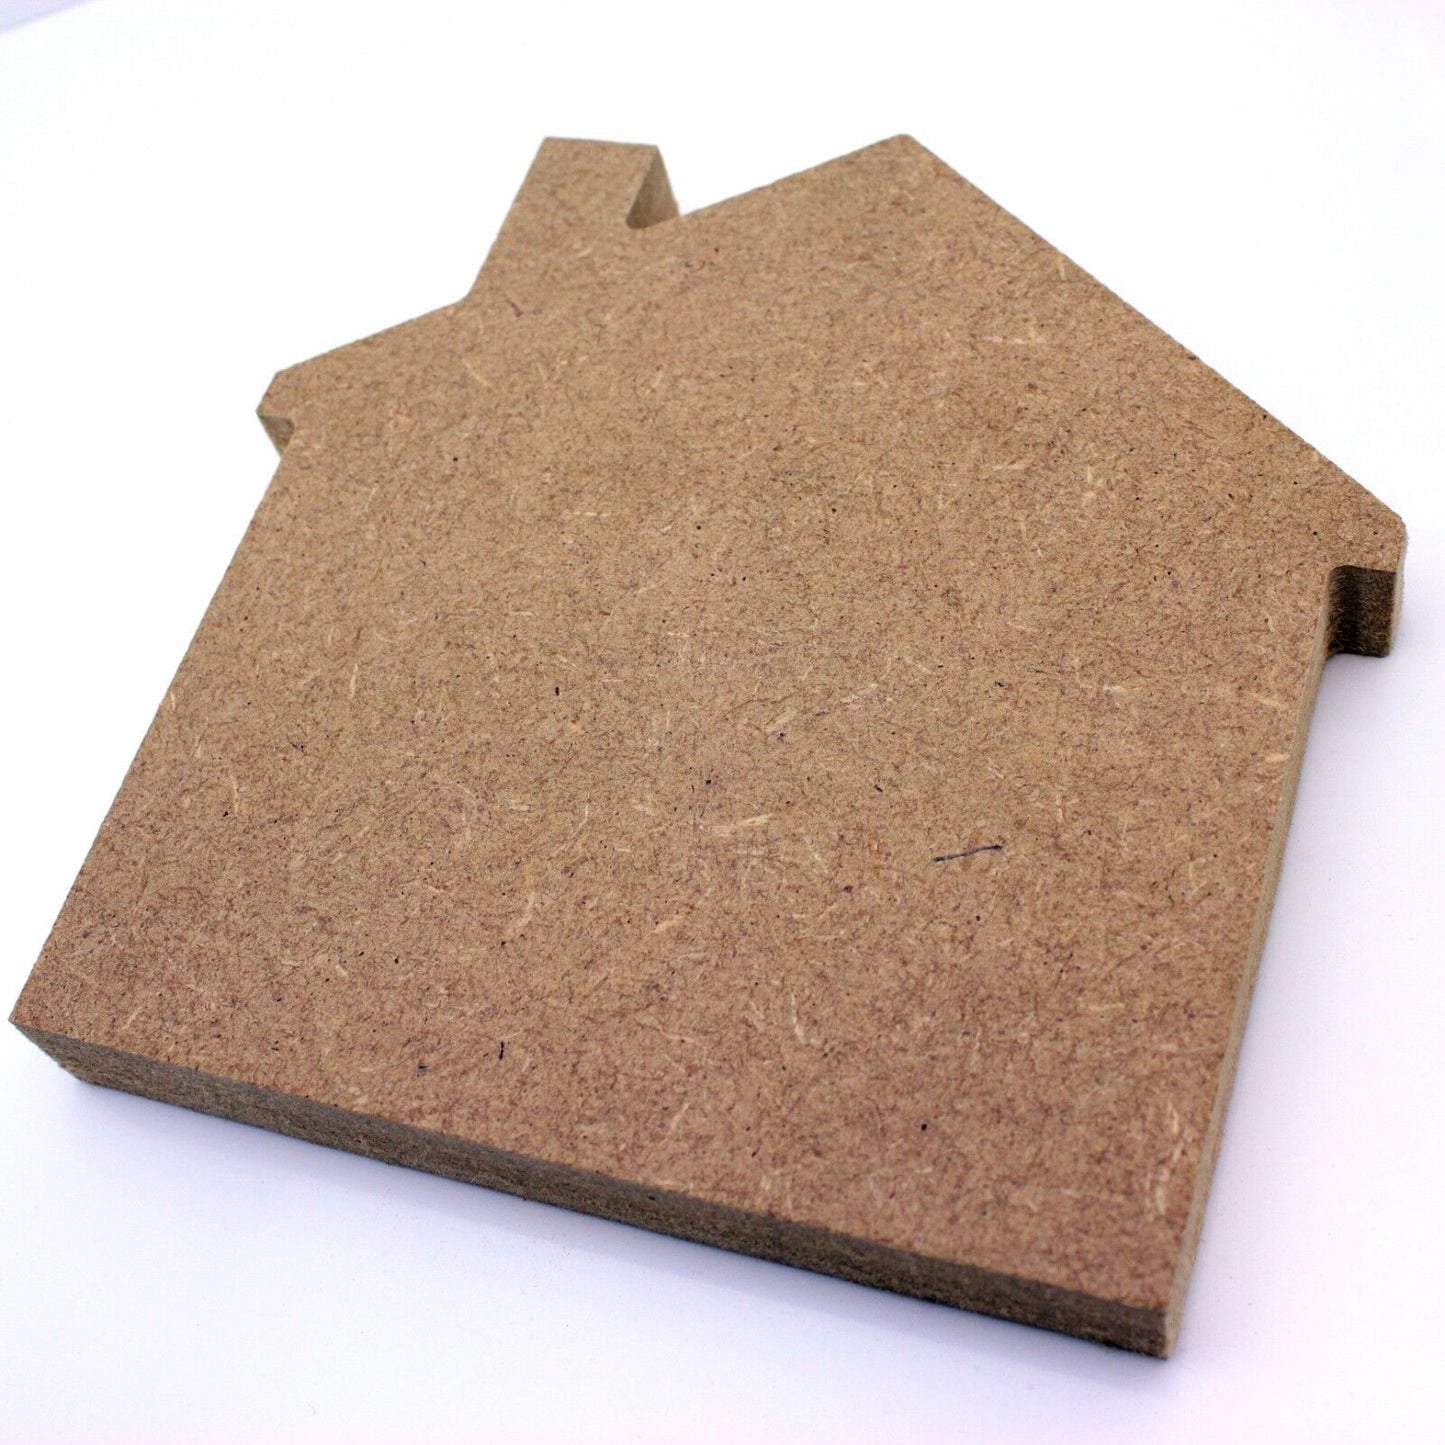 Free Standing 18mm MDF Blank House Craft Shape. 10cm to 30cm Size. Home, Family